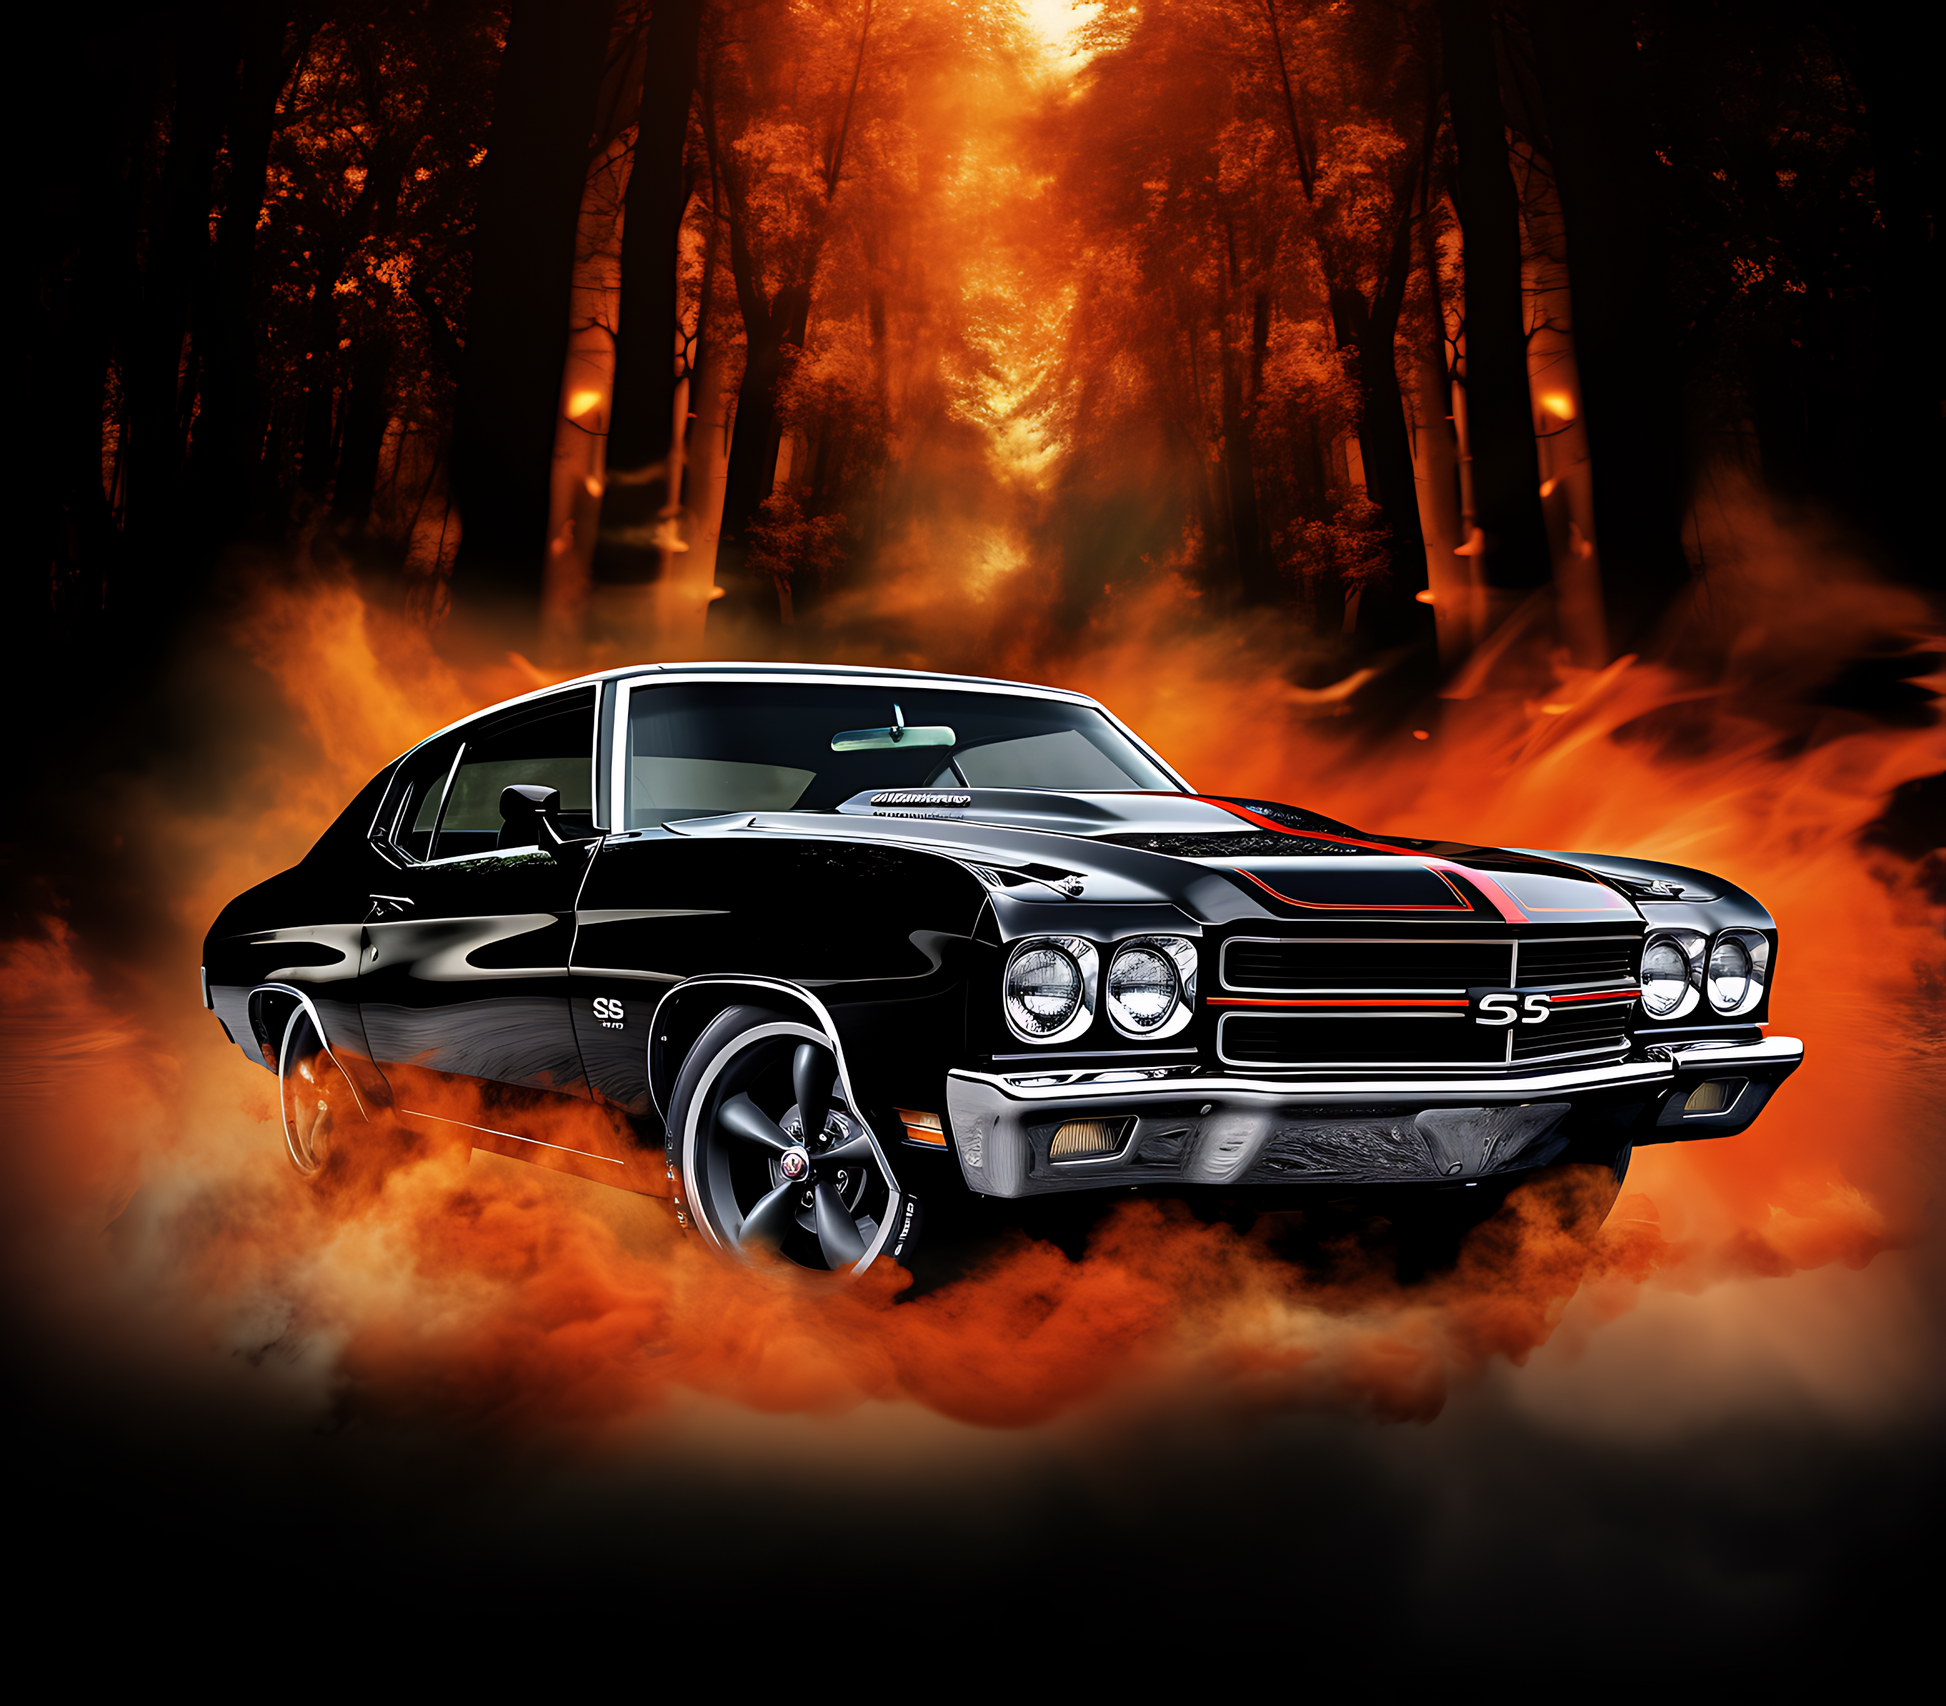 Muscle cars ruled the roads and this tumbler pays homage to the Chevelle SS in classic black with flames under the chassis and a woodlands background.